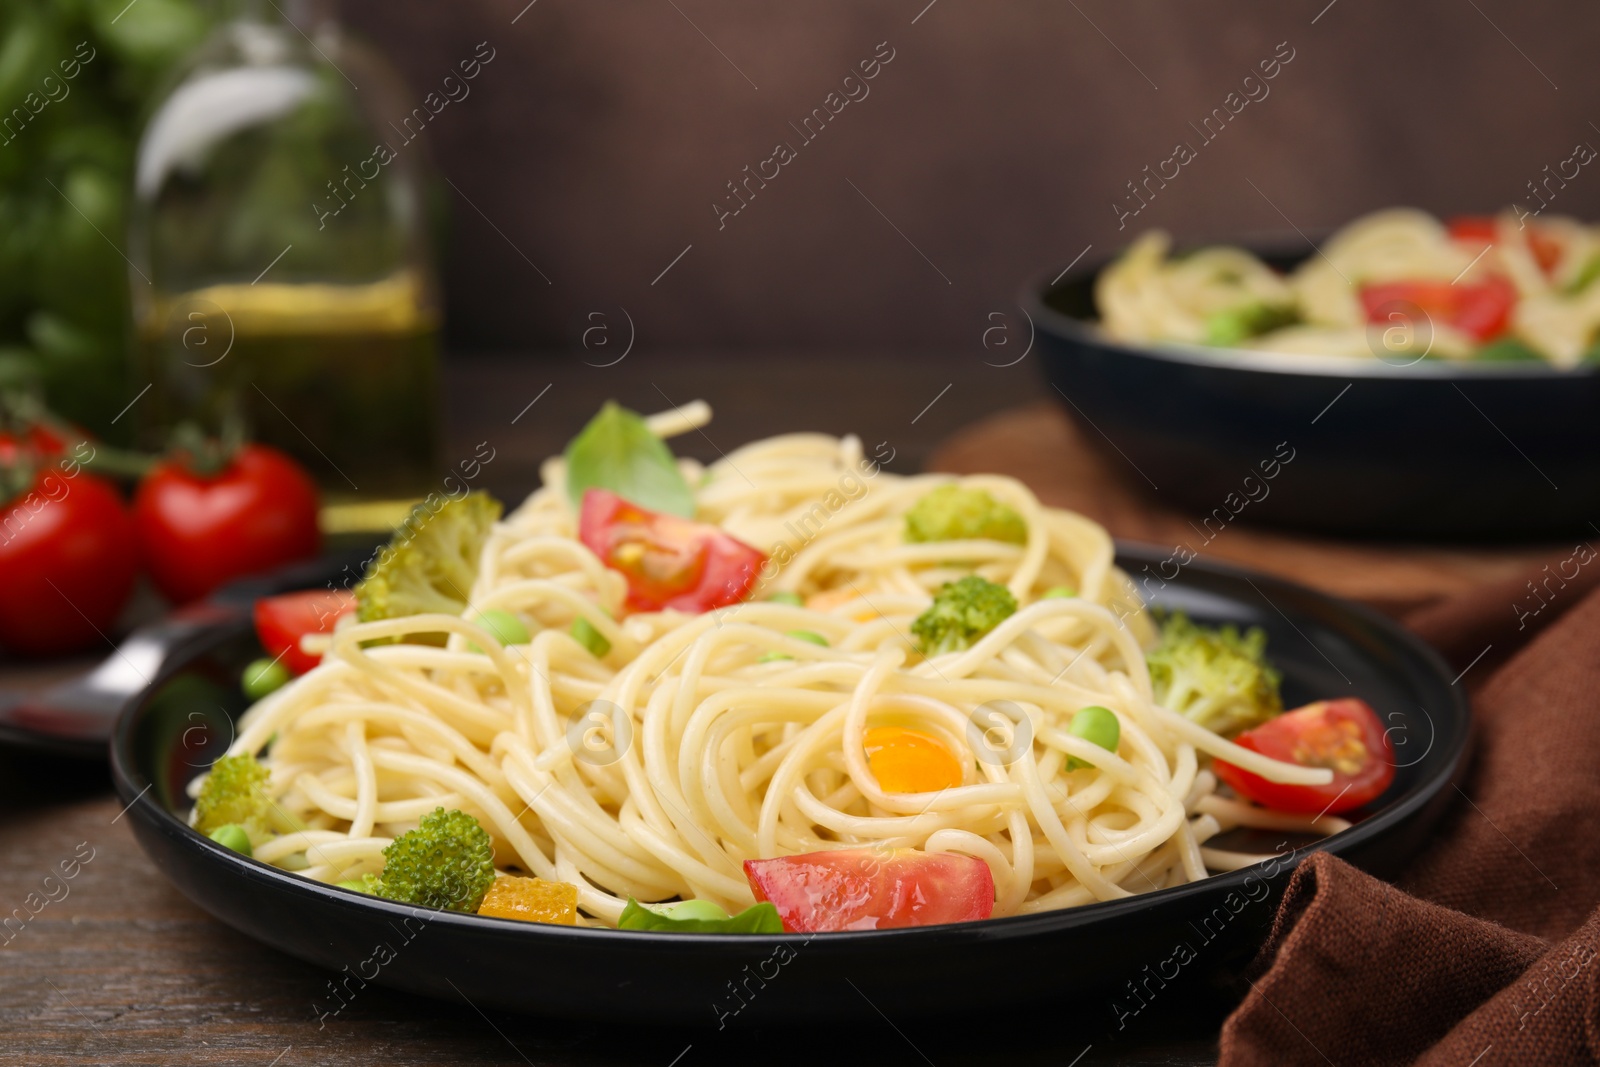 Photo of Plate of delicious pasta primavera and ingredients on table, closeup